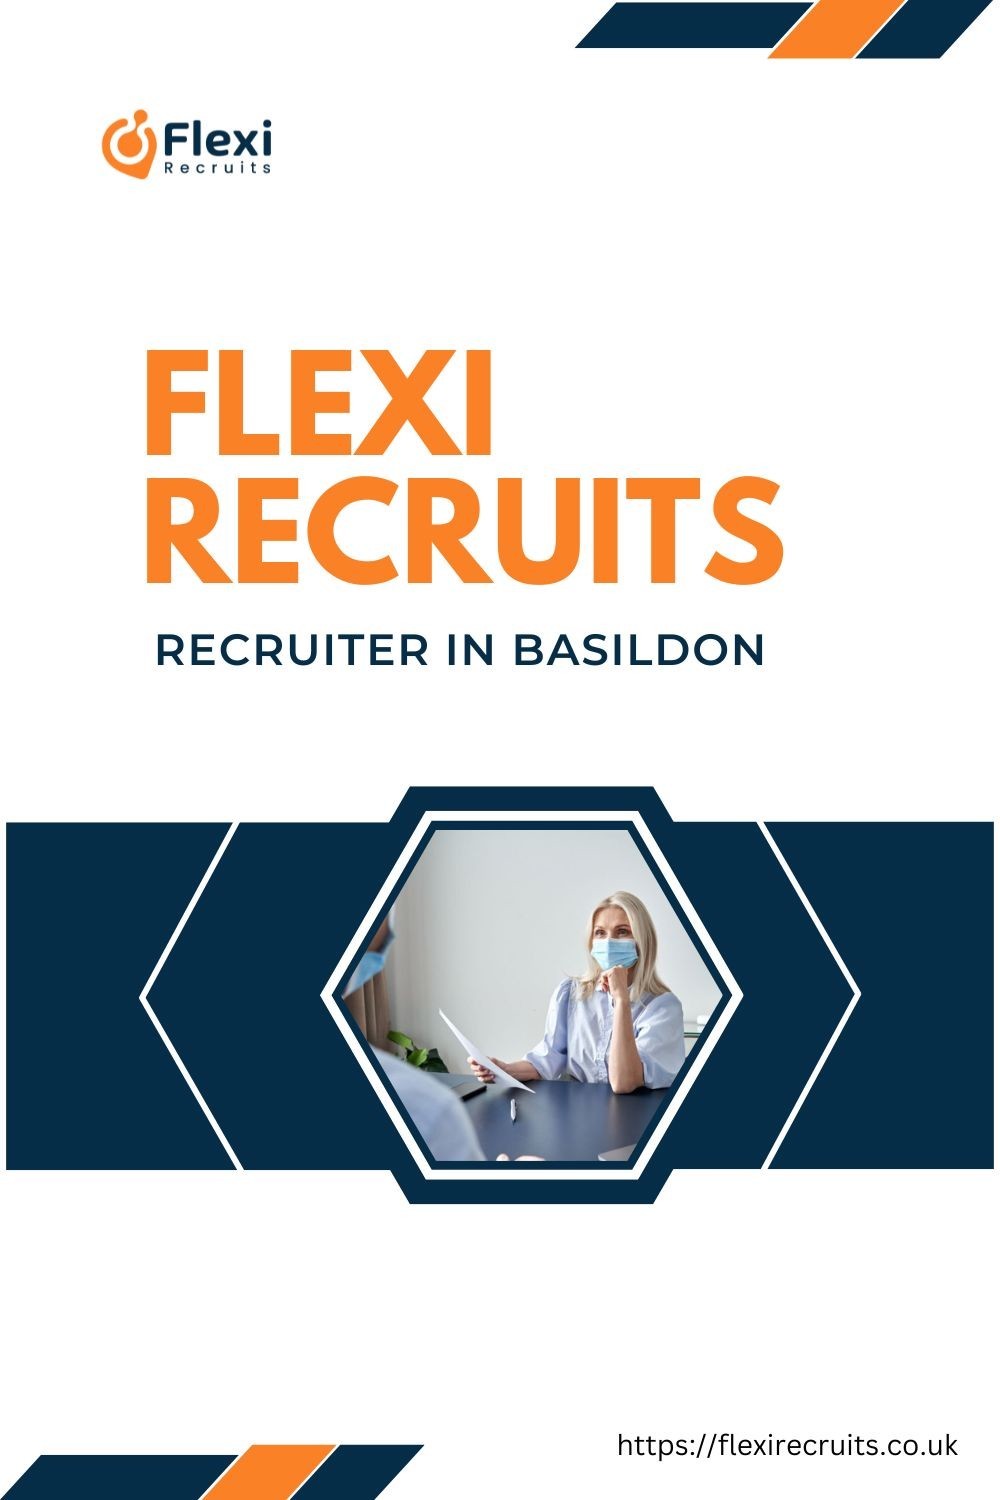 Your Dream Career Made Easy With Flexi Recruits